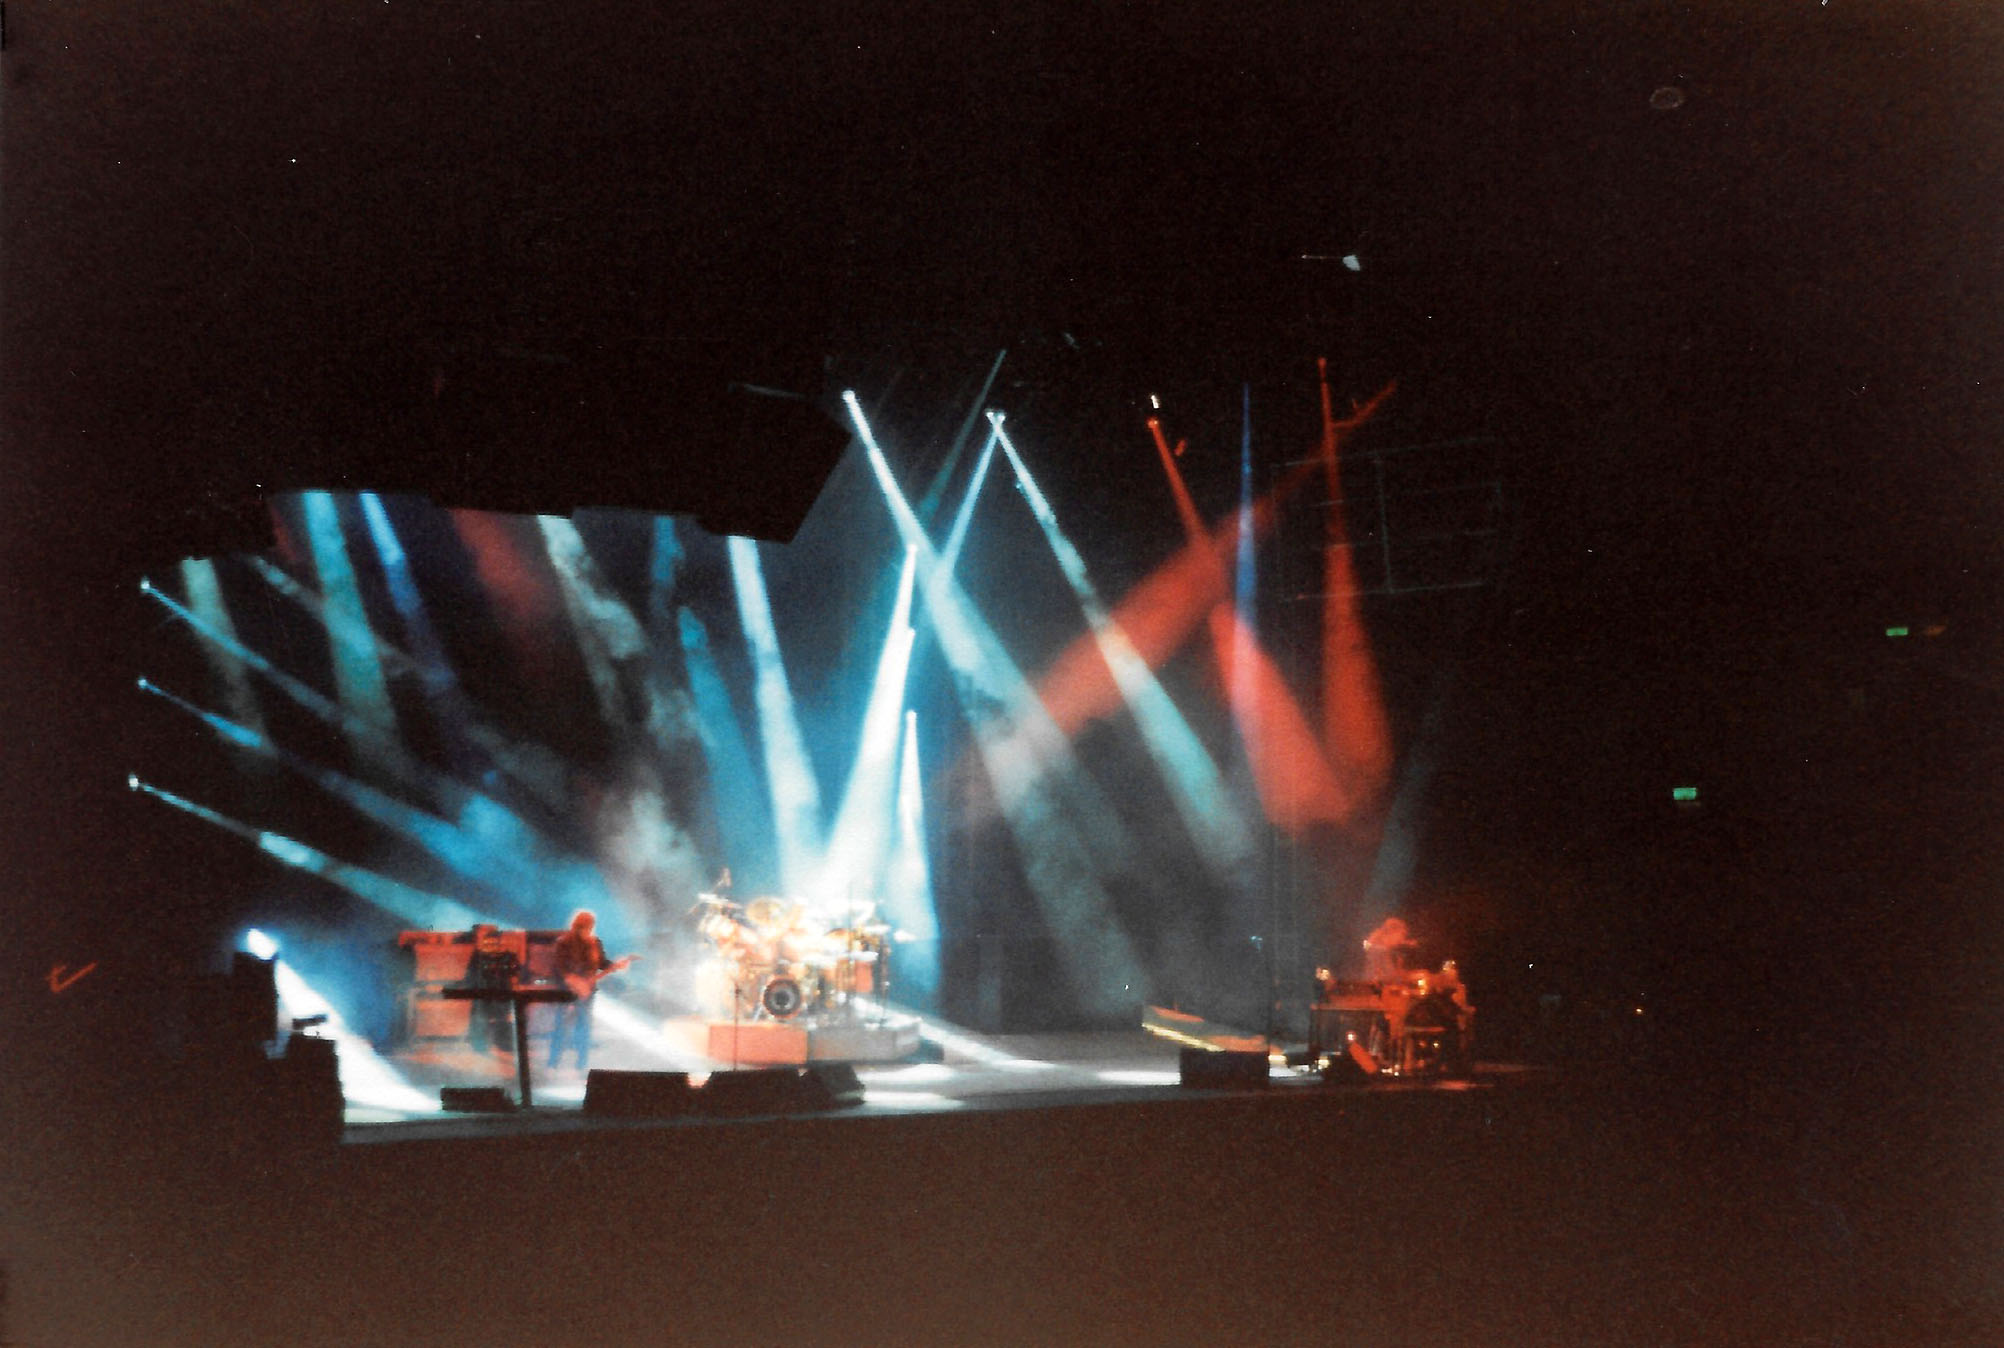 Rush Hold Your Fire Tour Pictures - London, England - April 28th, 1988